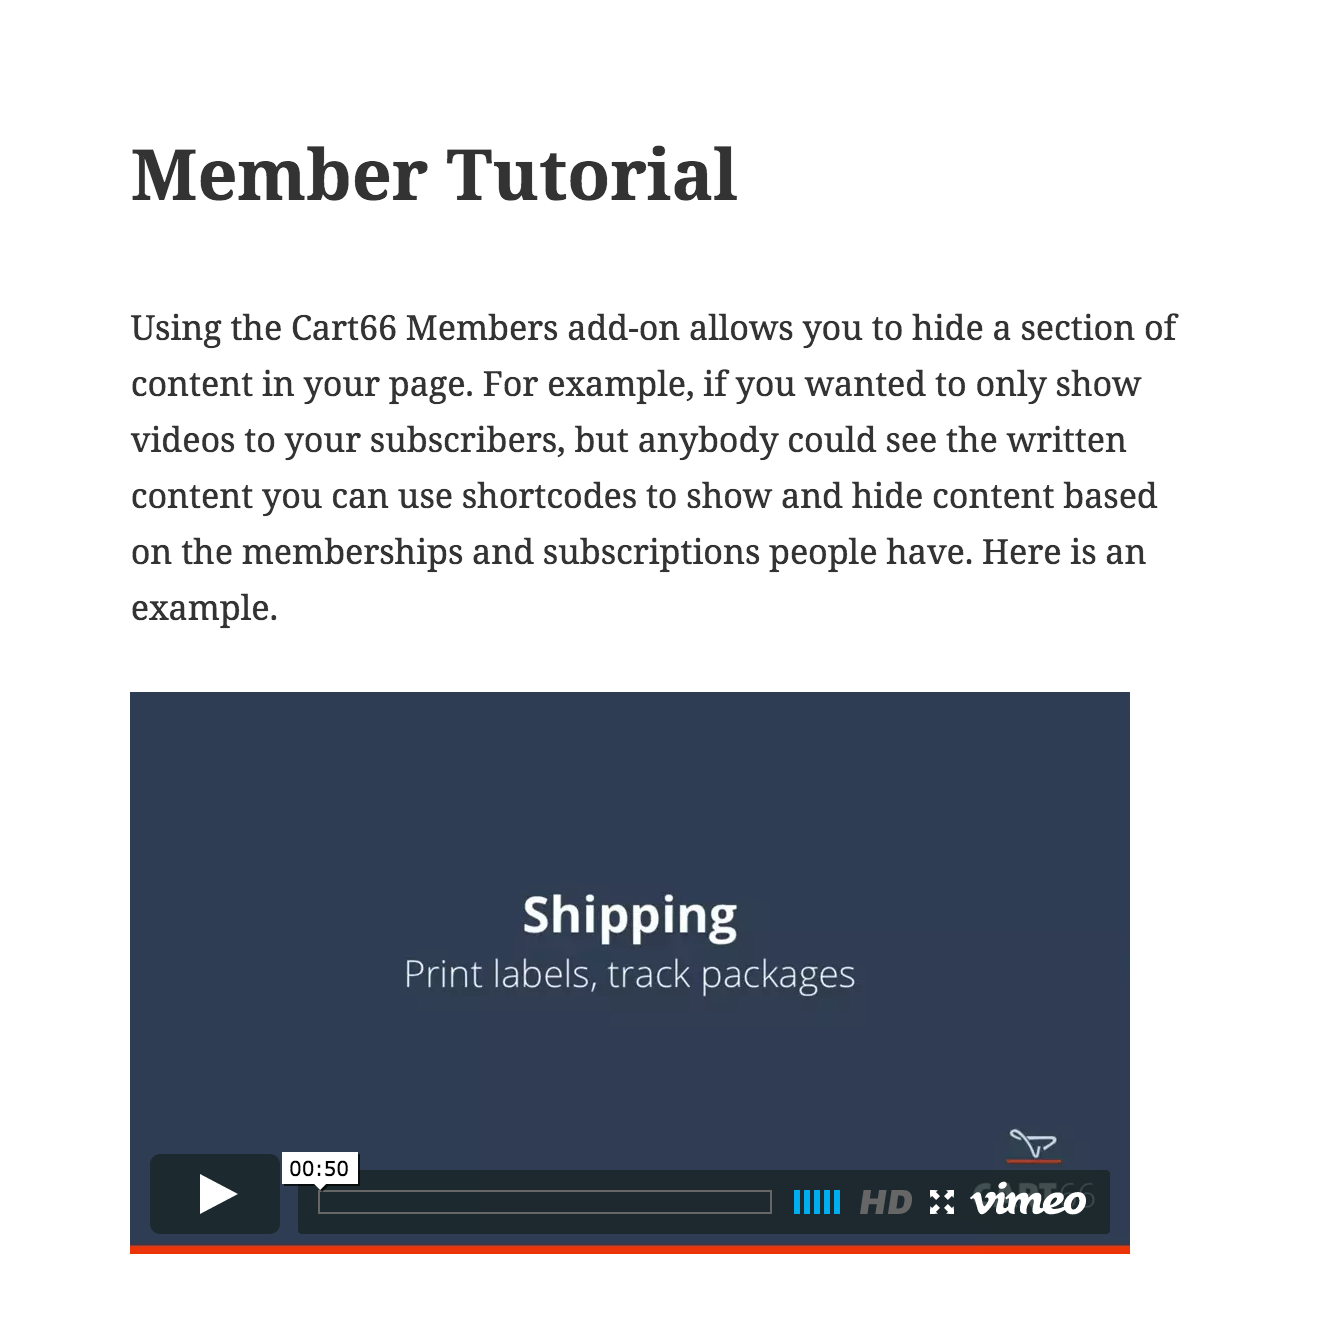 Member tutorial available to subscribers